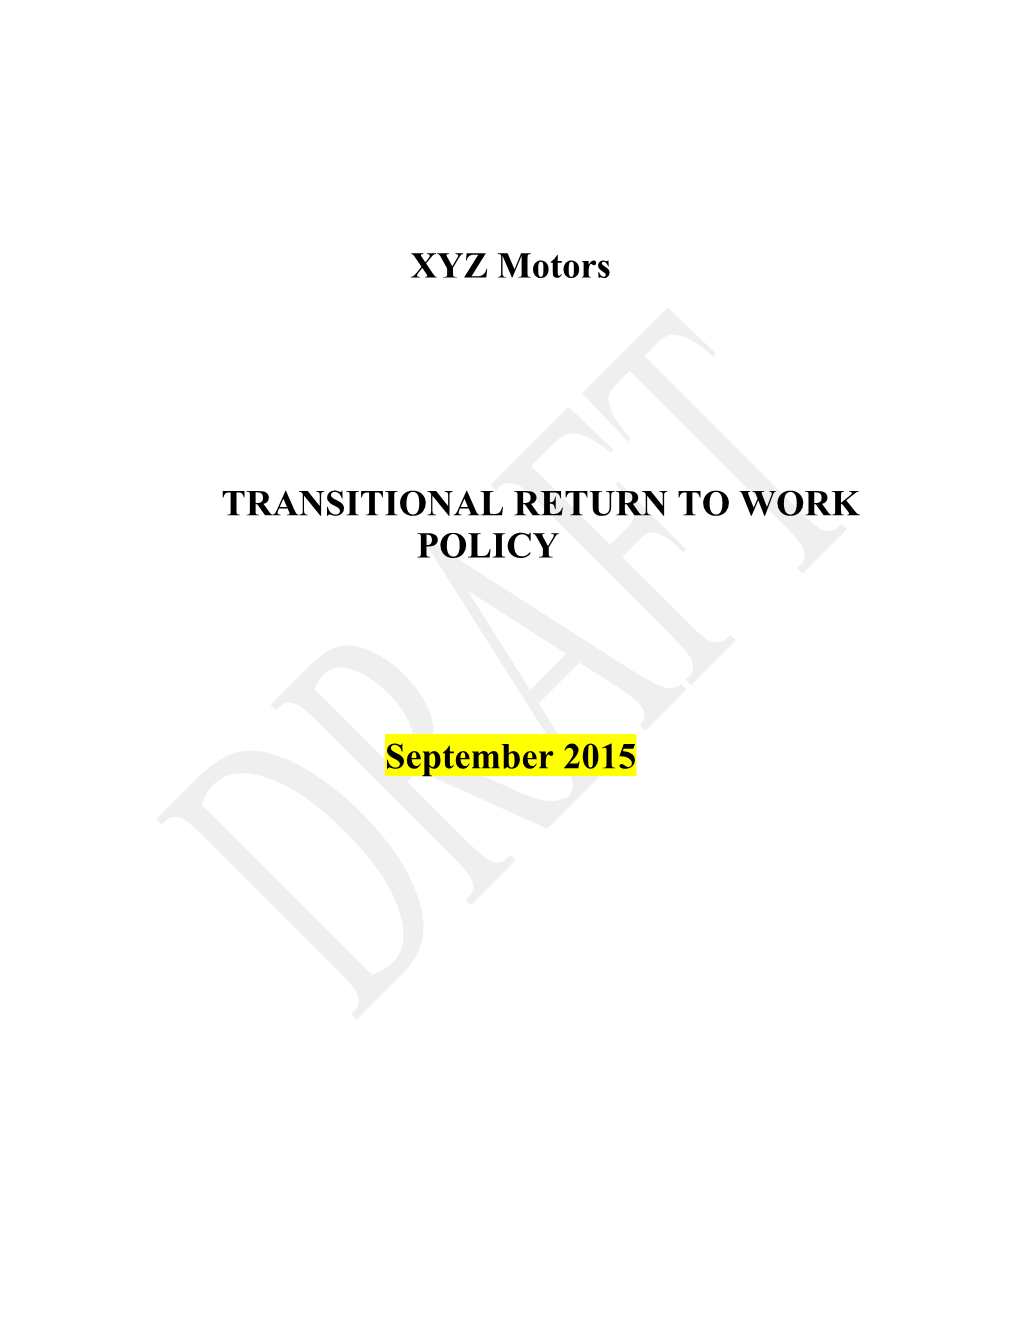 Transitional Return to Work